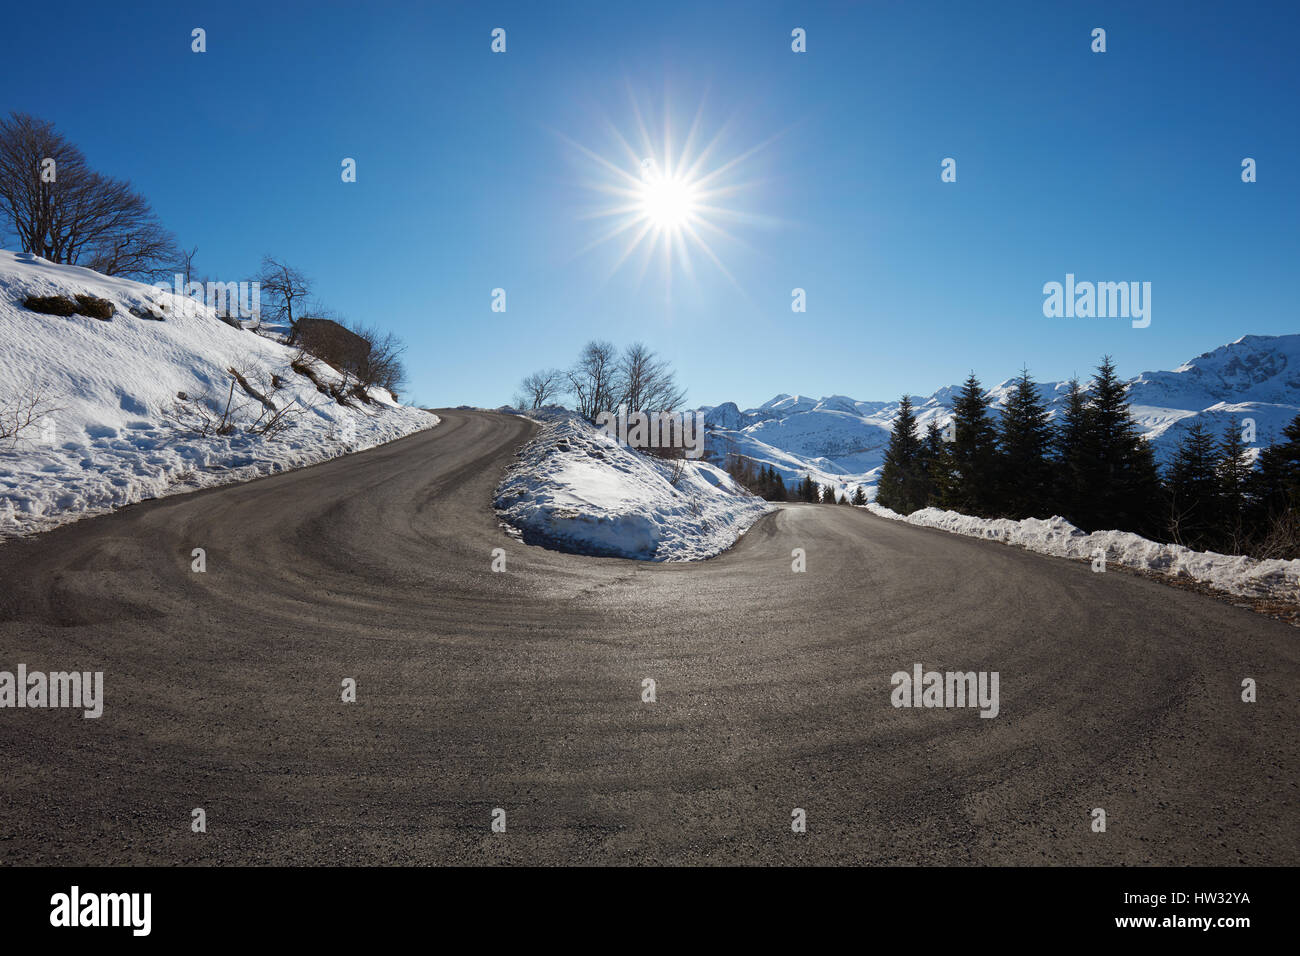 Large empty mountain road curve on Alps with snow on sides, blue sky and sun Stock Photo